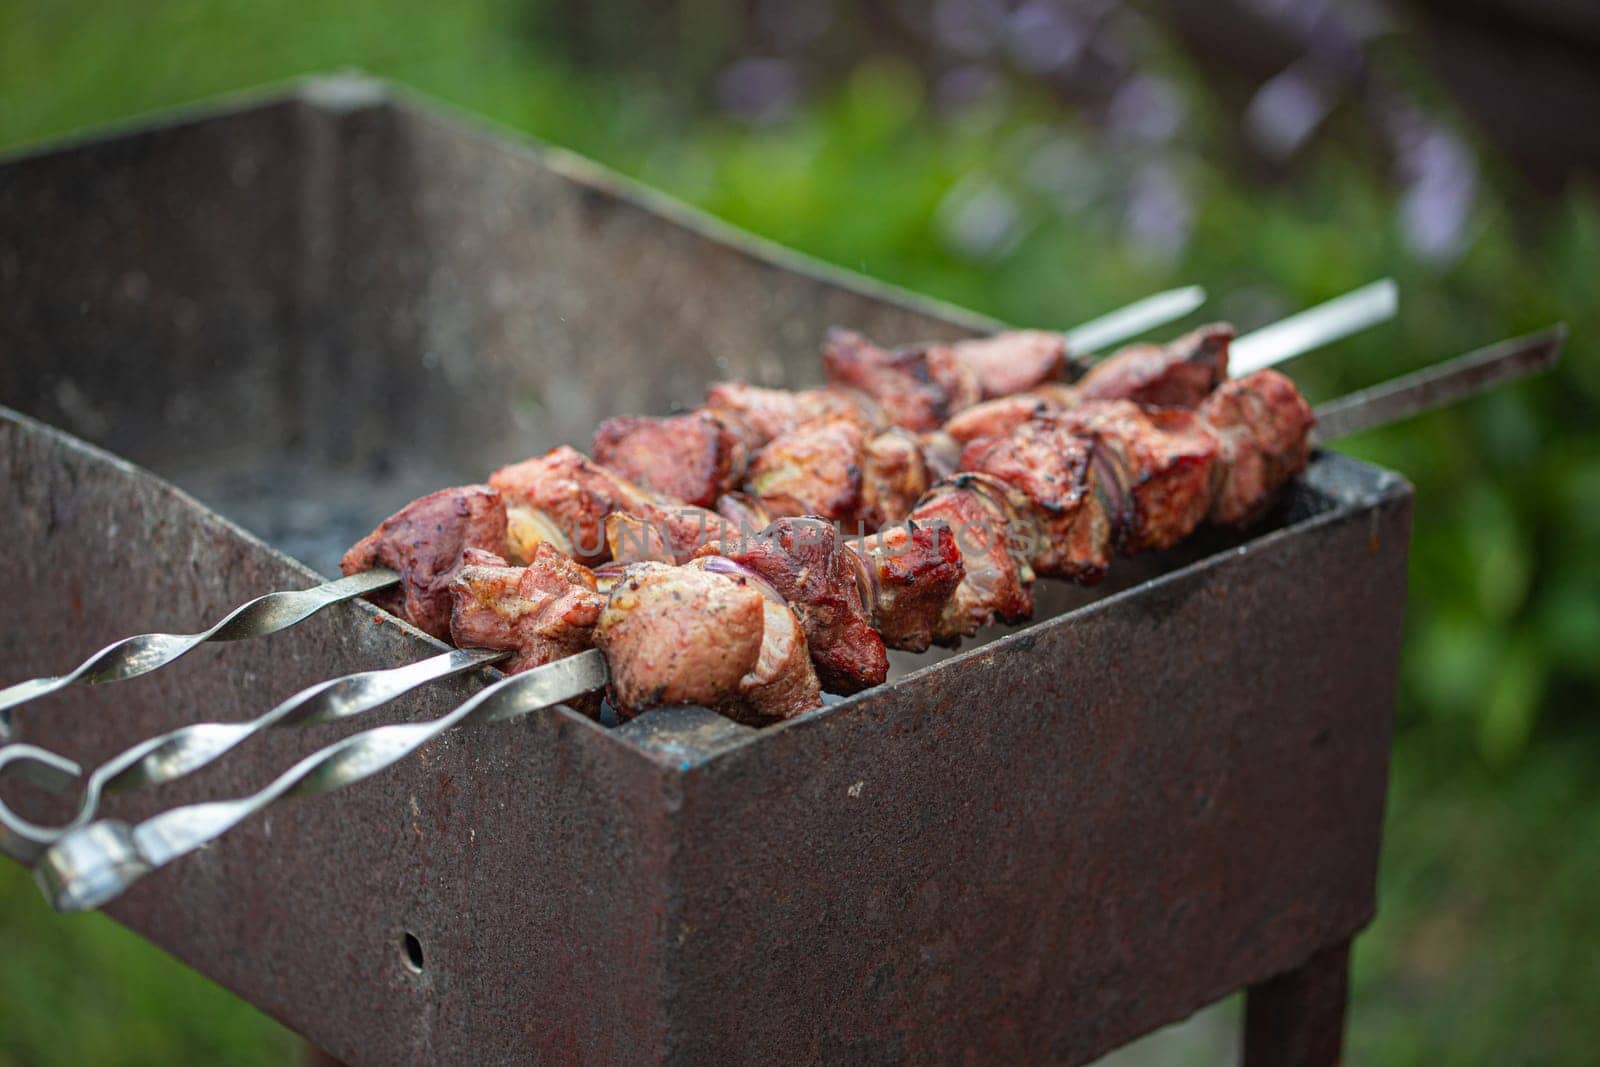 Outdoor picnic with grilling fresh meat shish kebab (shashlik) on a steel skewers on a grill wood coal. BBQ on summer picnic in green garden by its_al_dente